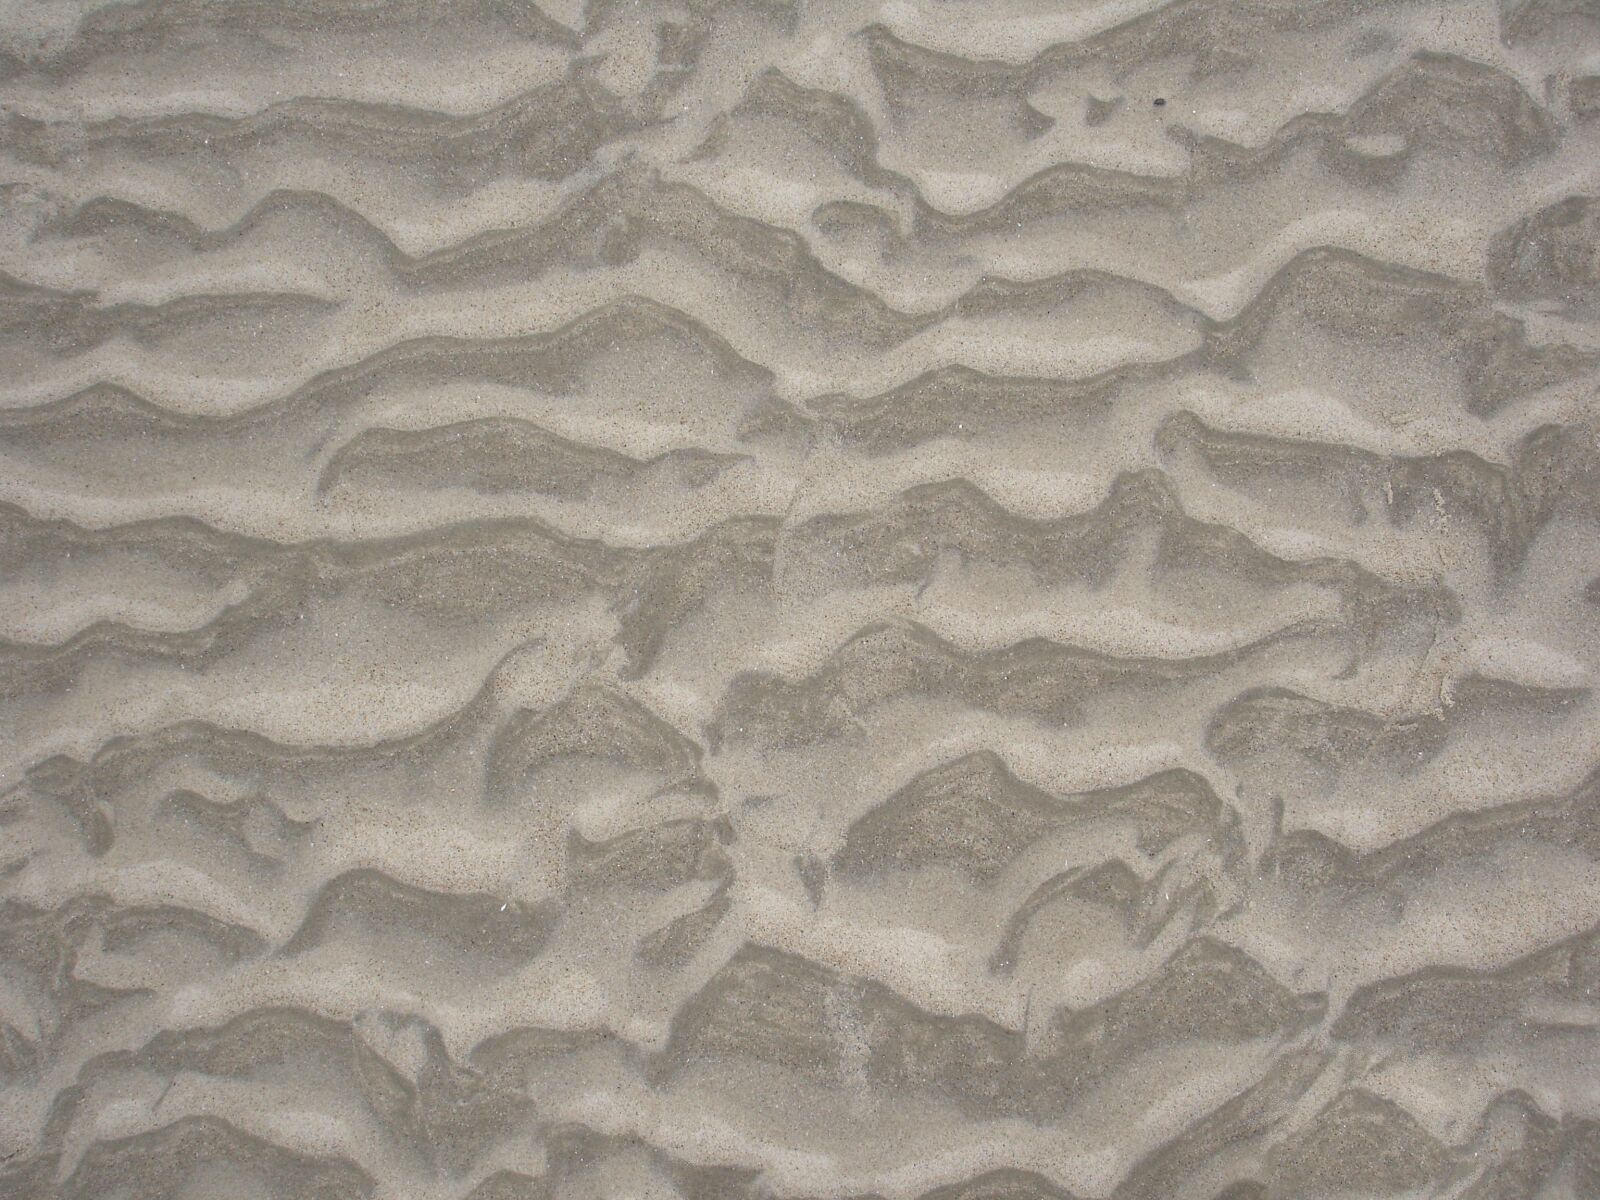 Sony DSC-P200 sample photo. Sand, image of an photography